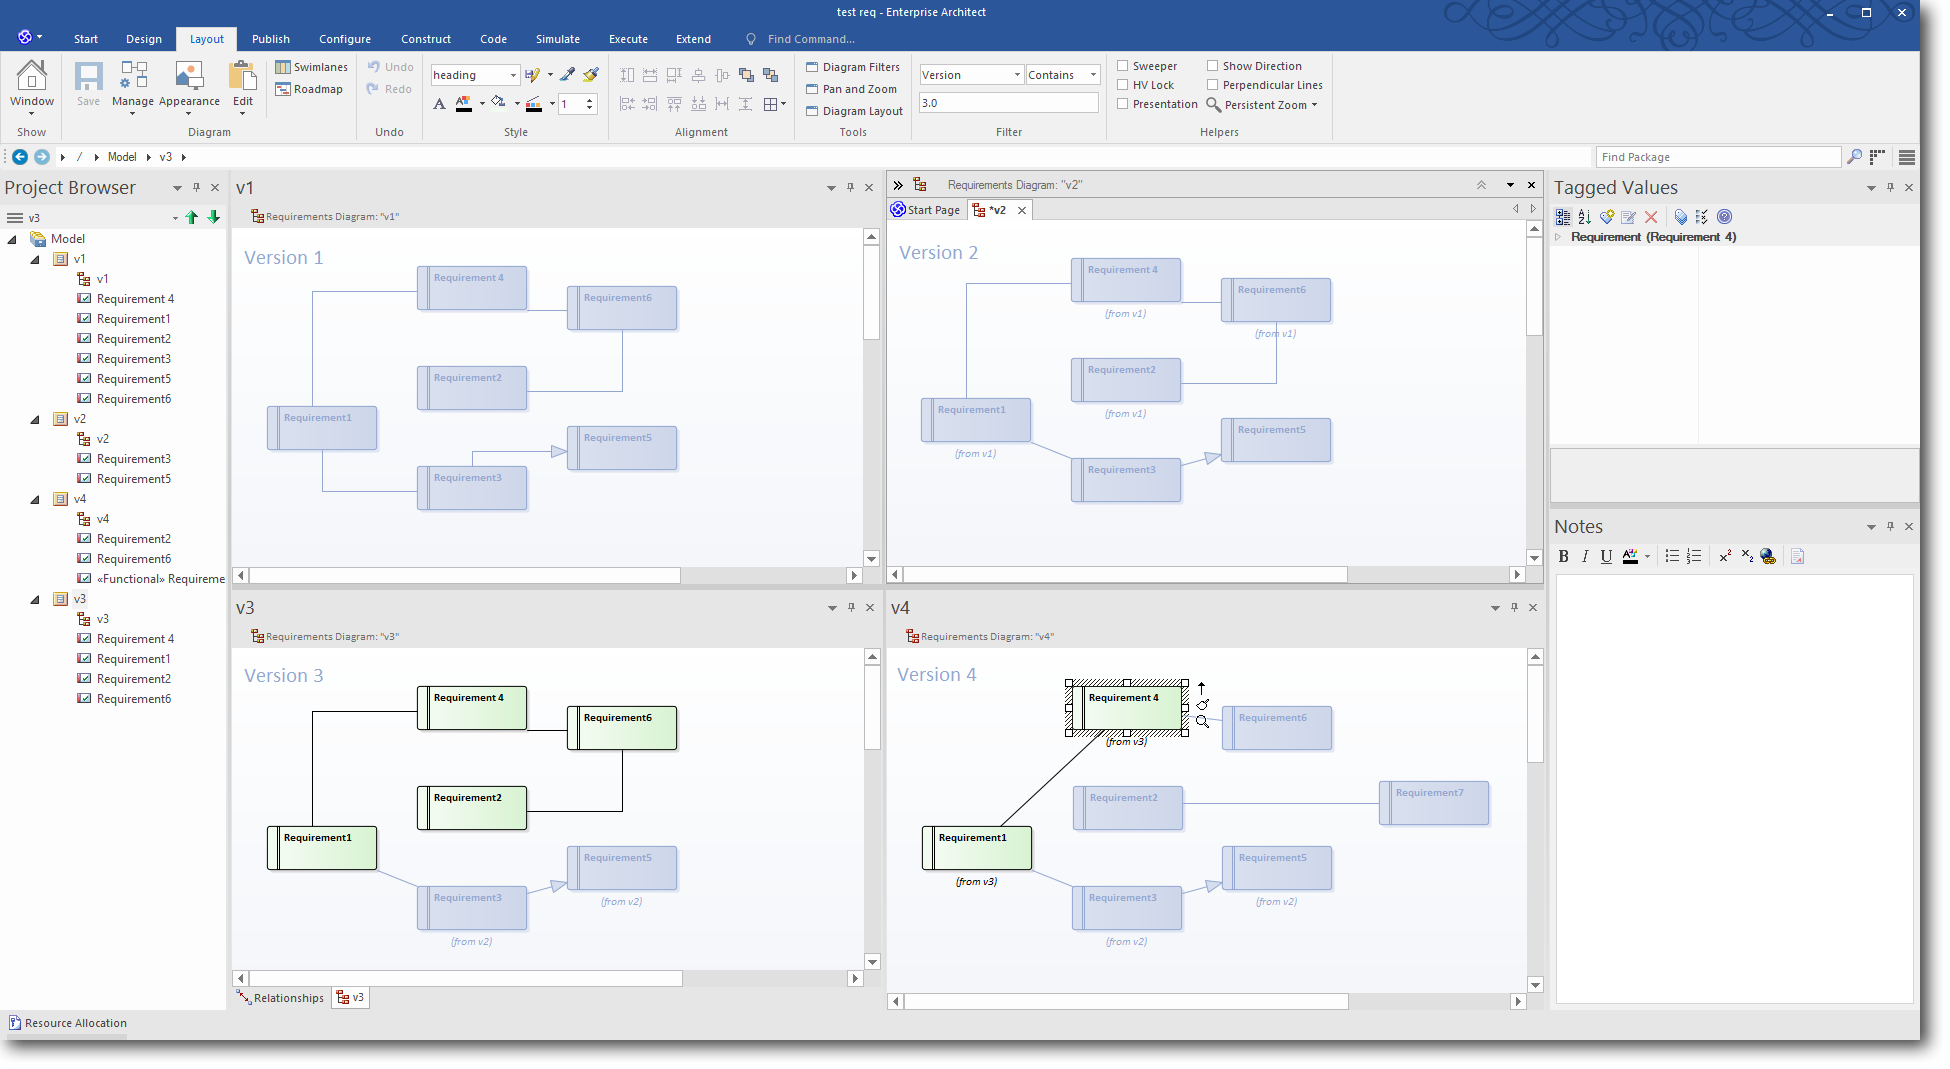 Enterprise Architect 13: Time Aware Modeling - Using a Diagram Filter to highlight Version 3.0 elements